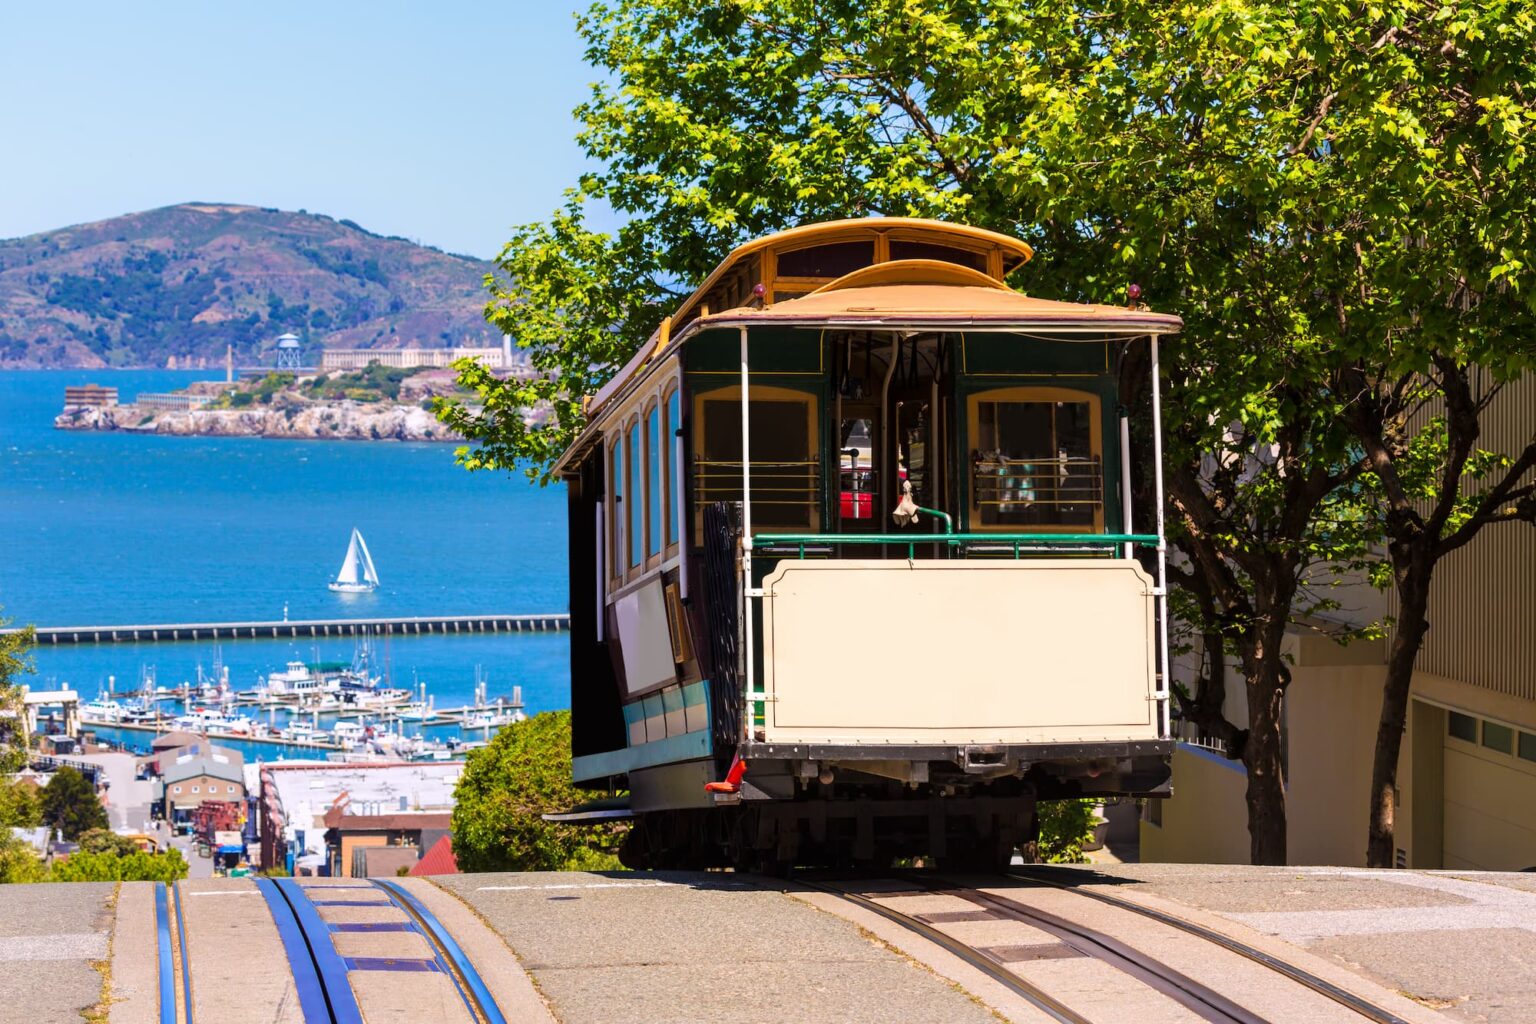 San-Francisco-cable-car-on-top-of-Hyde-street-overlooing-the-bay.jpg